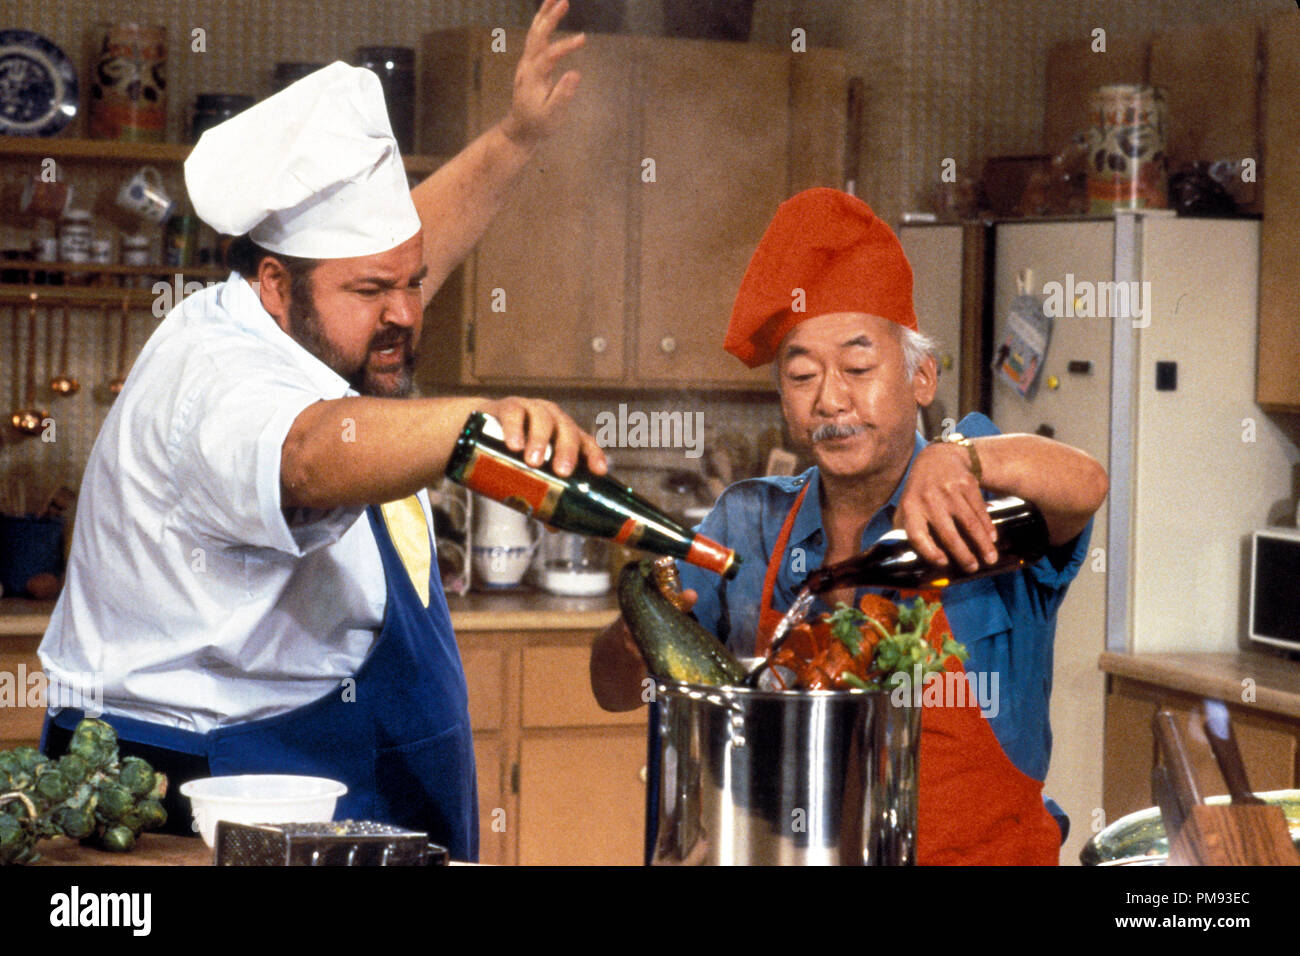 Studio Publicity Still from 'The Dom DeLuise Show' Dom DeLuise, Pat Morita 1987  All Rights Reserved   File Reference # 31697065THA  For Editorial Use Only Stock Photo